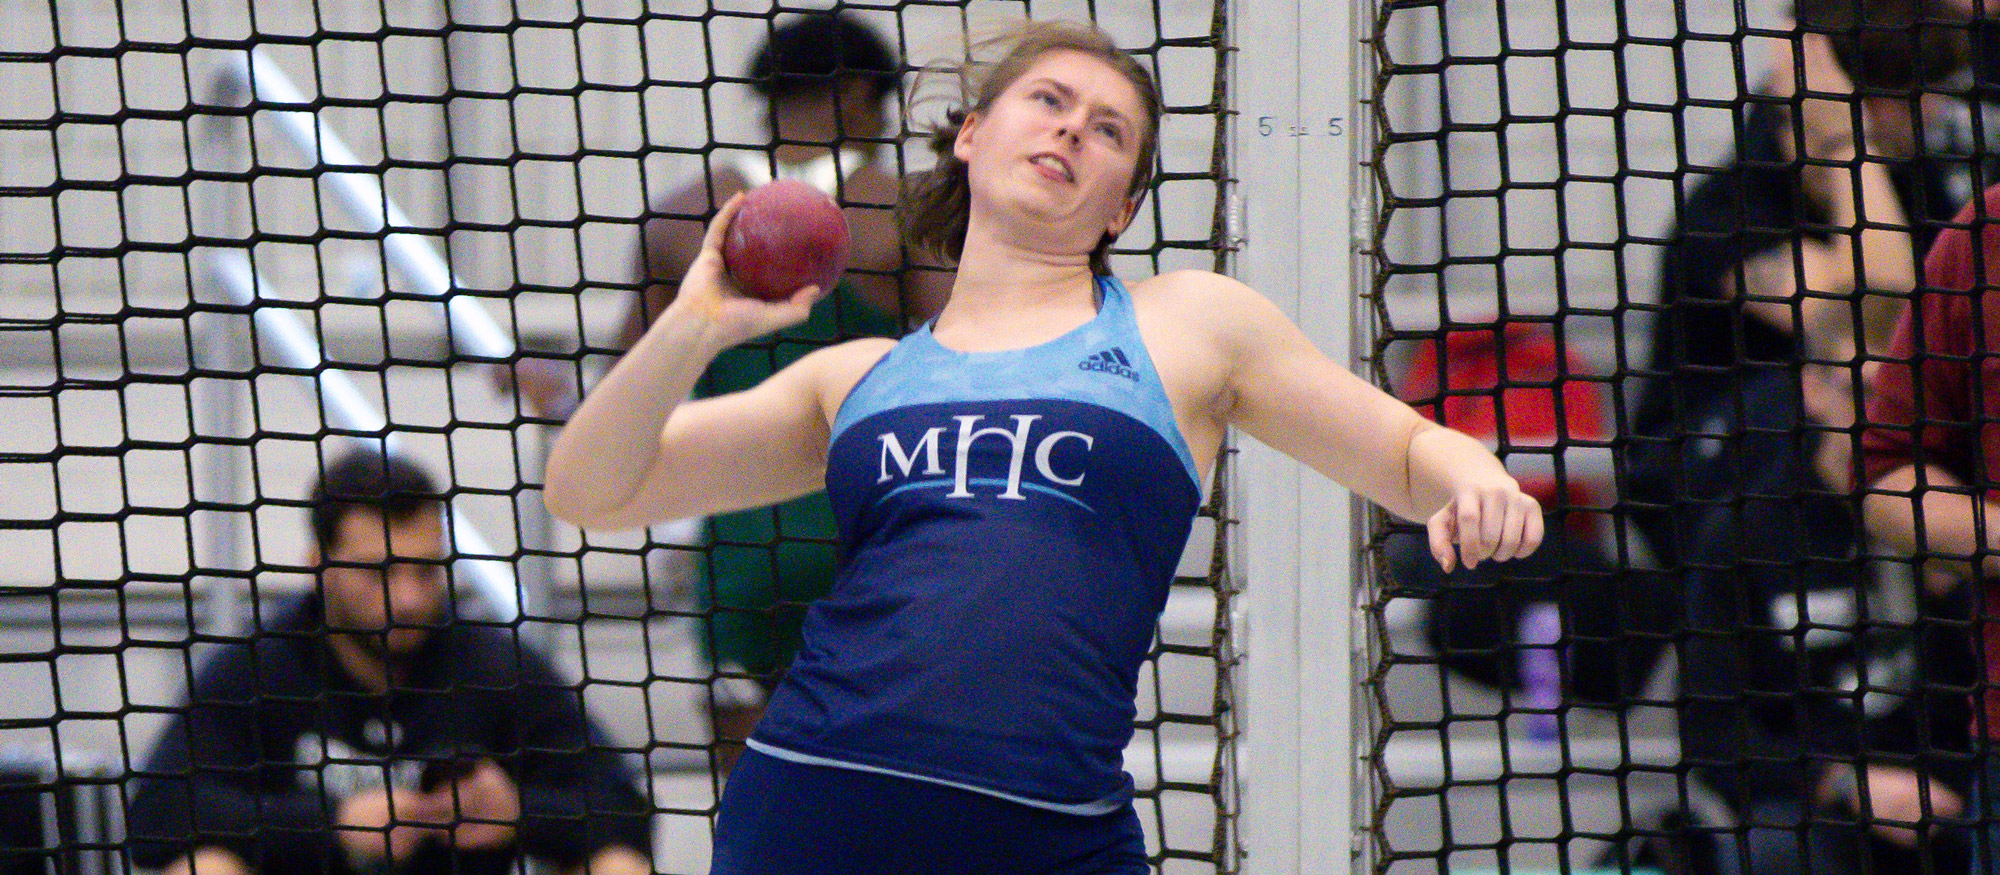 Emma Doyle moved into fourth place on Mount Holyoke's all-time performance list in the shot put on Dec. 3, 2022. (Bob Blanchard/RJB Sports)